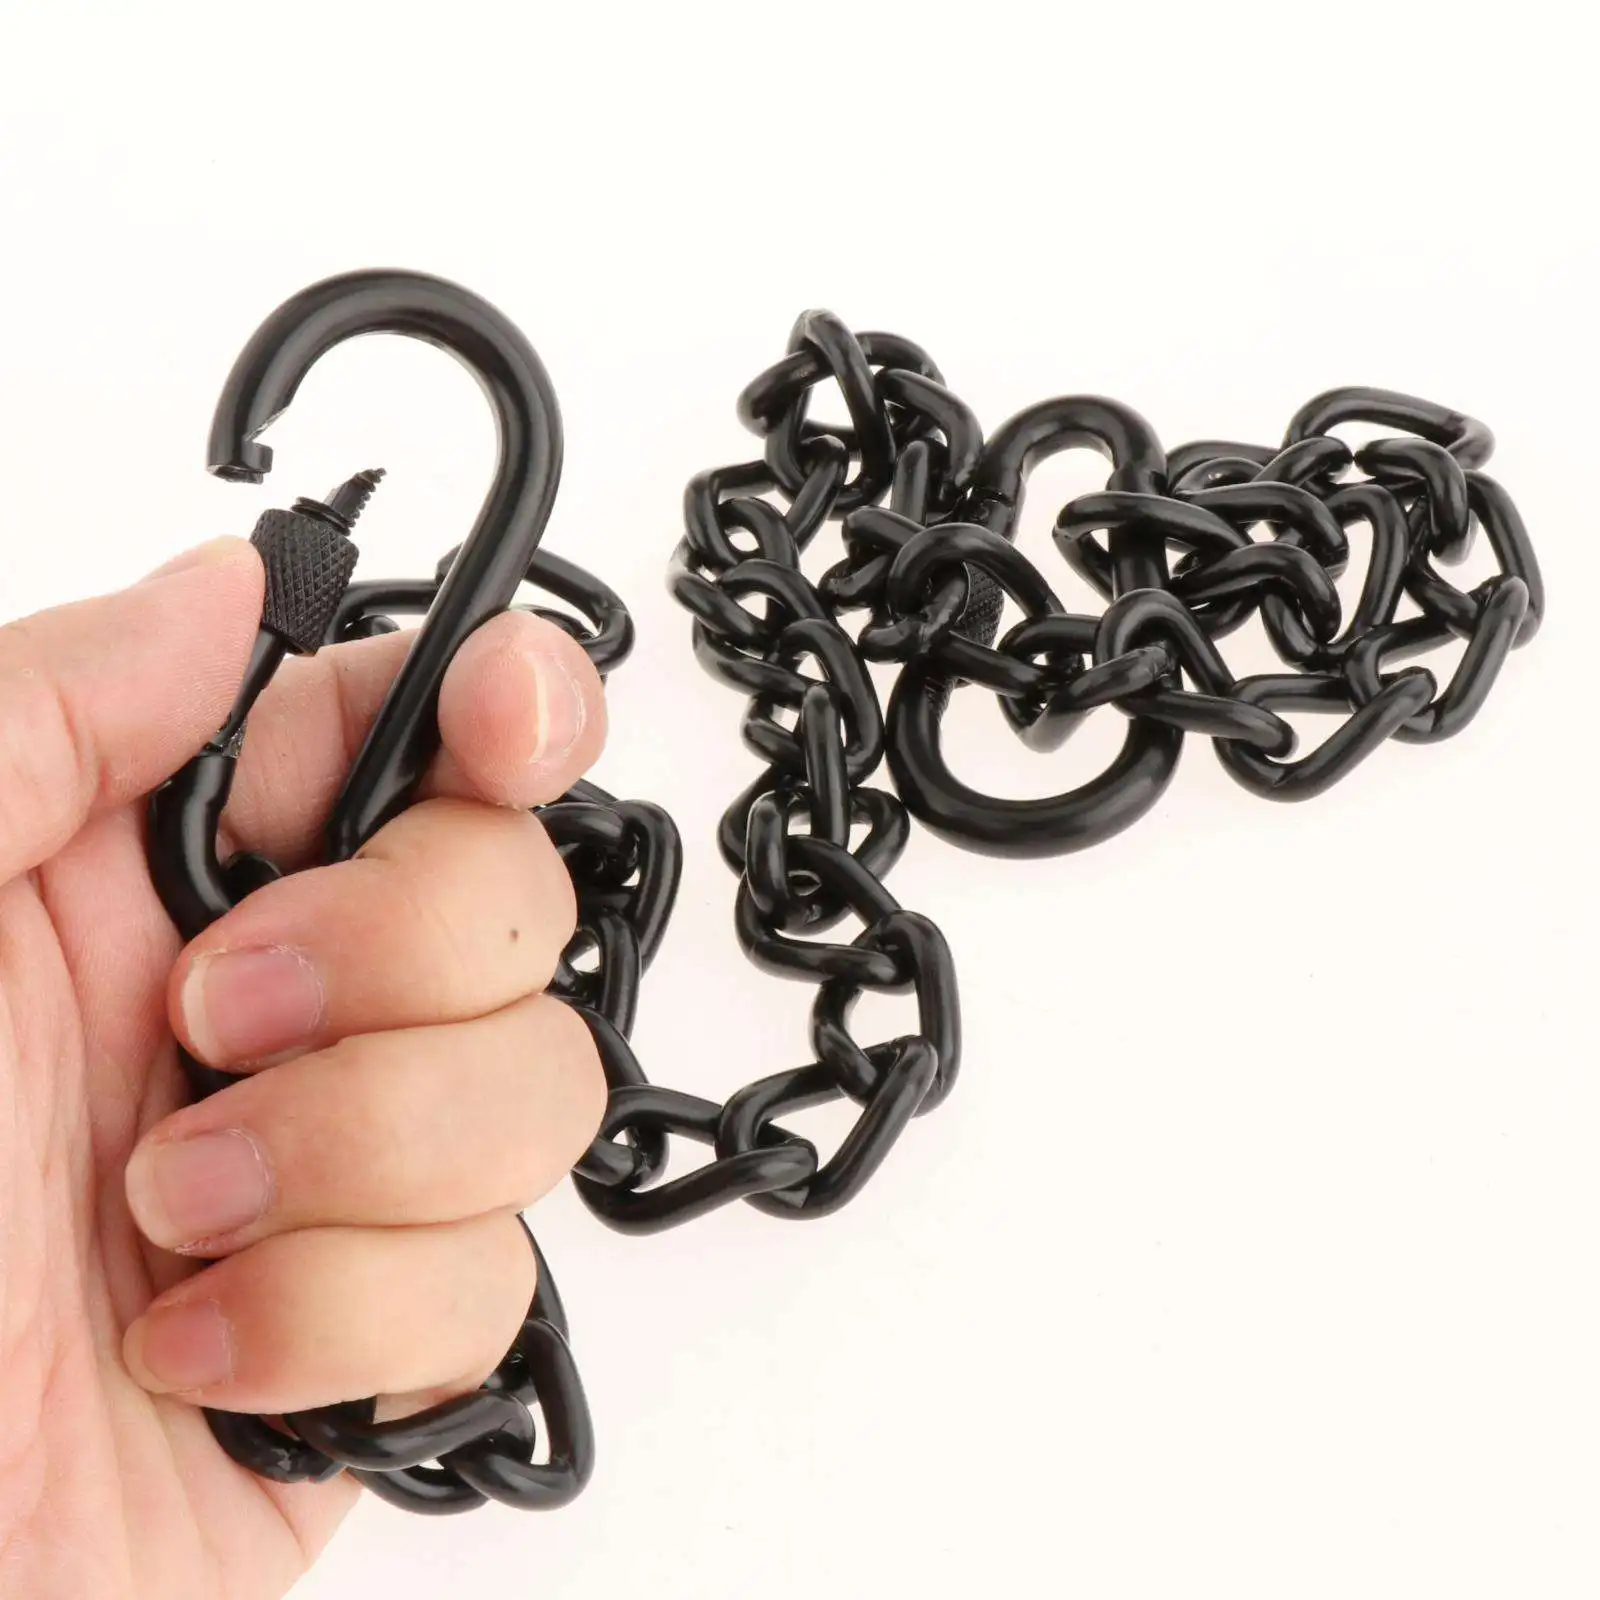 Hanging Chair Chain Accessories Heavy Duty Hooks for Outdoor Punching Bag 